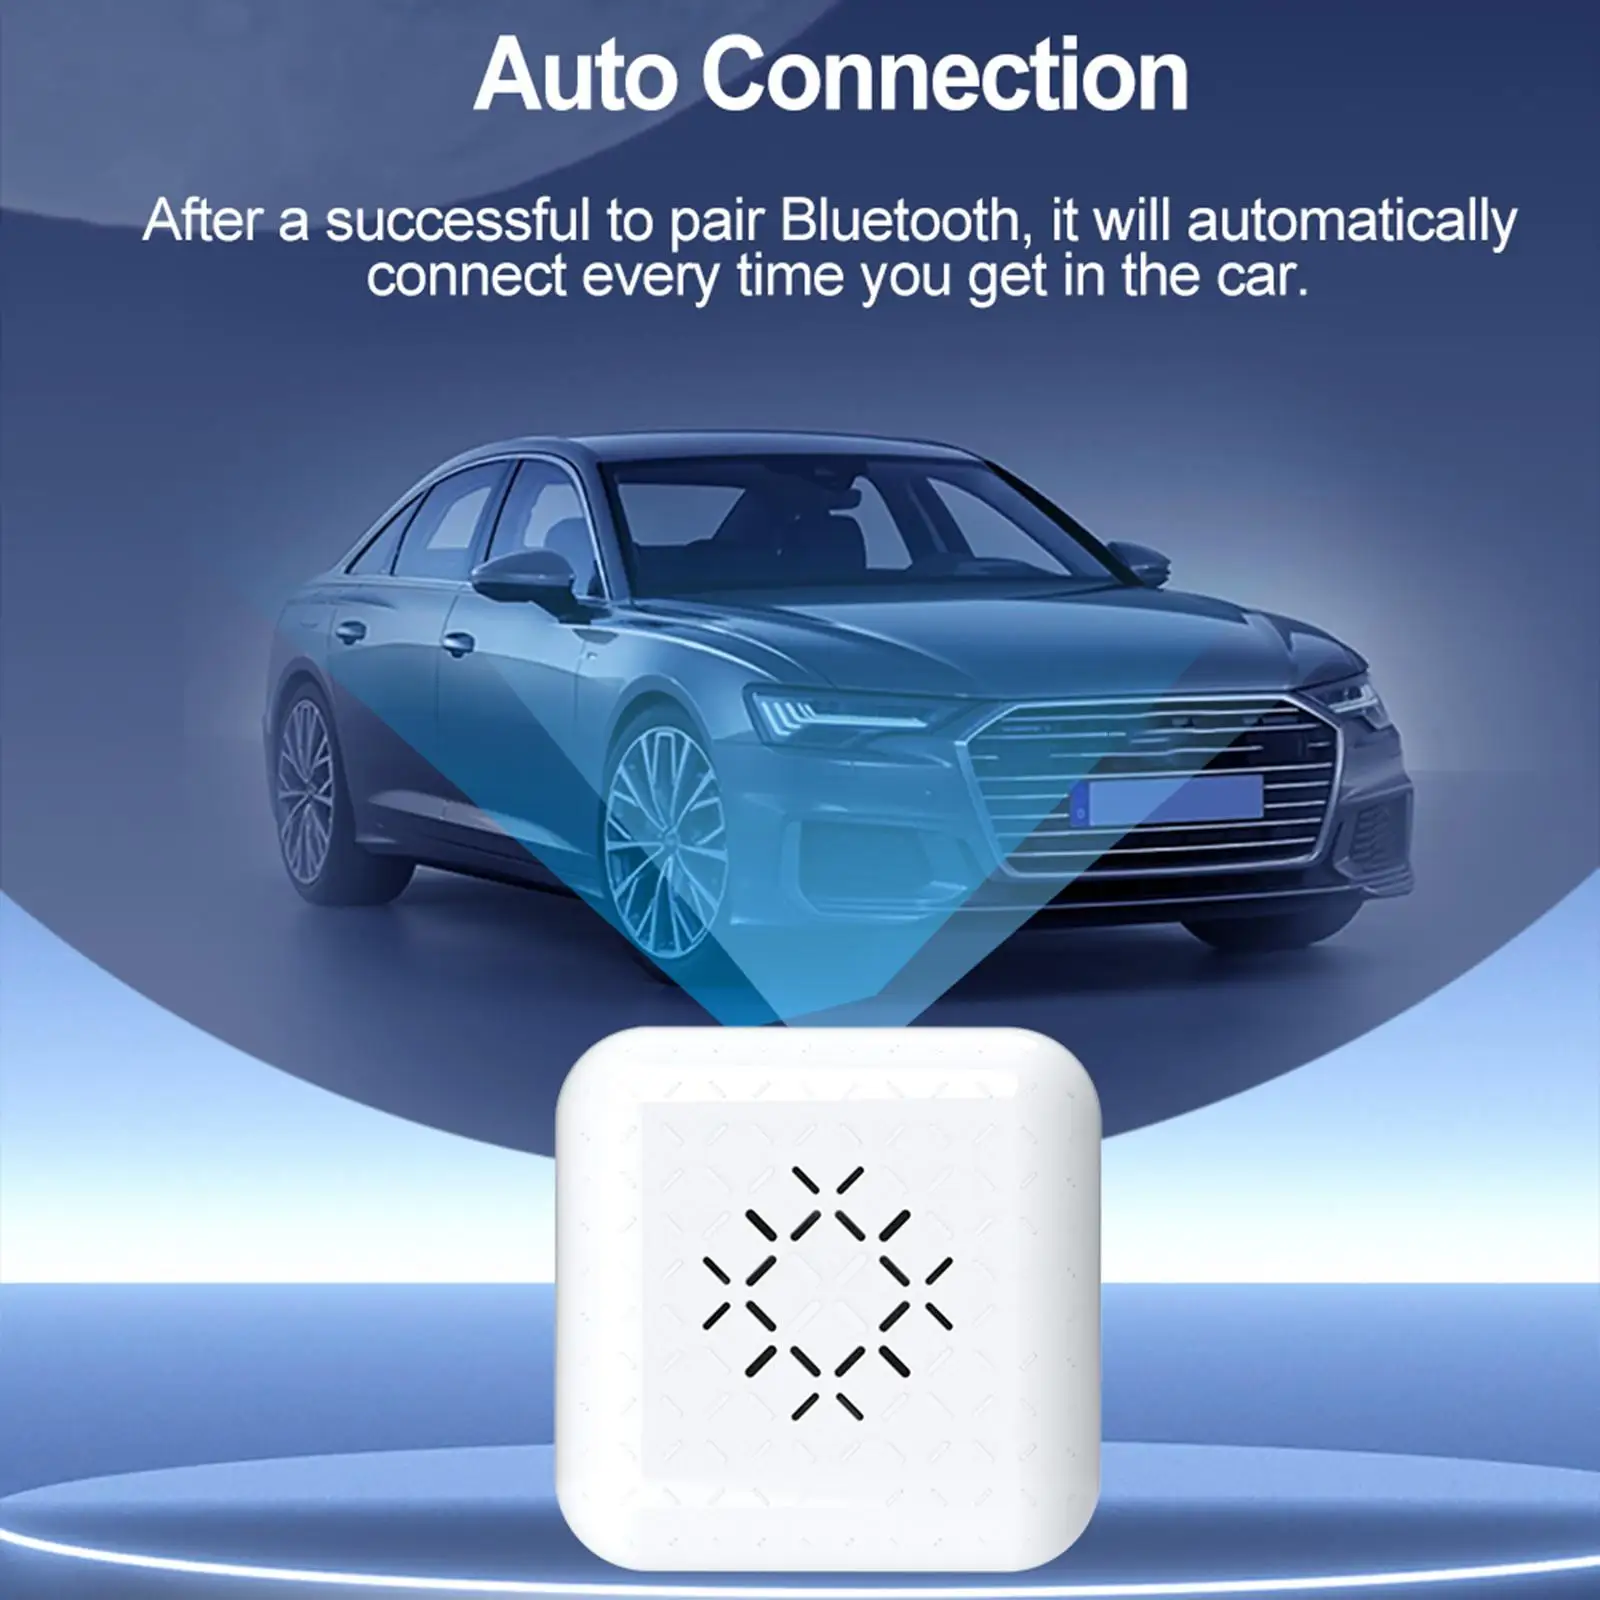 Wireless Car Play Adapter 5G WiFi for Wired Car Play Cars